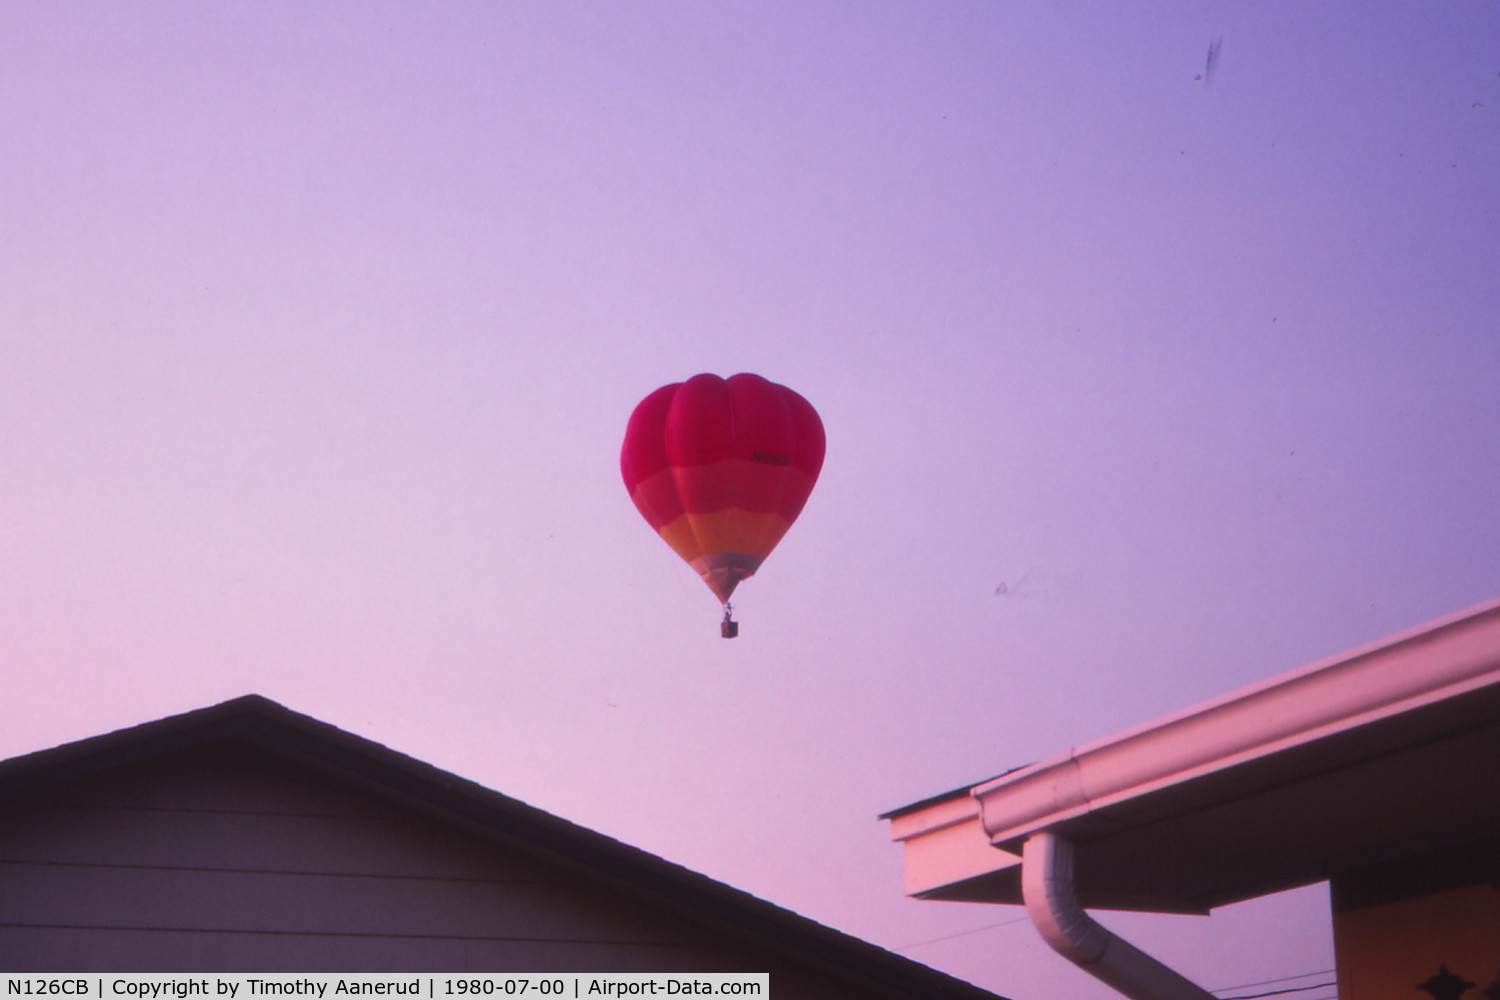 N126CB, 1977 Cameron Balloons V-56 C/N 324, Floating past my house in Champlin, MN.  Scanned from slide, dated July 1980